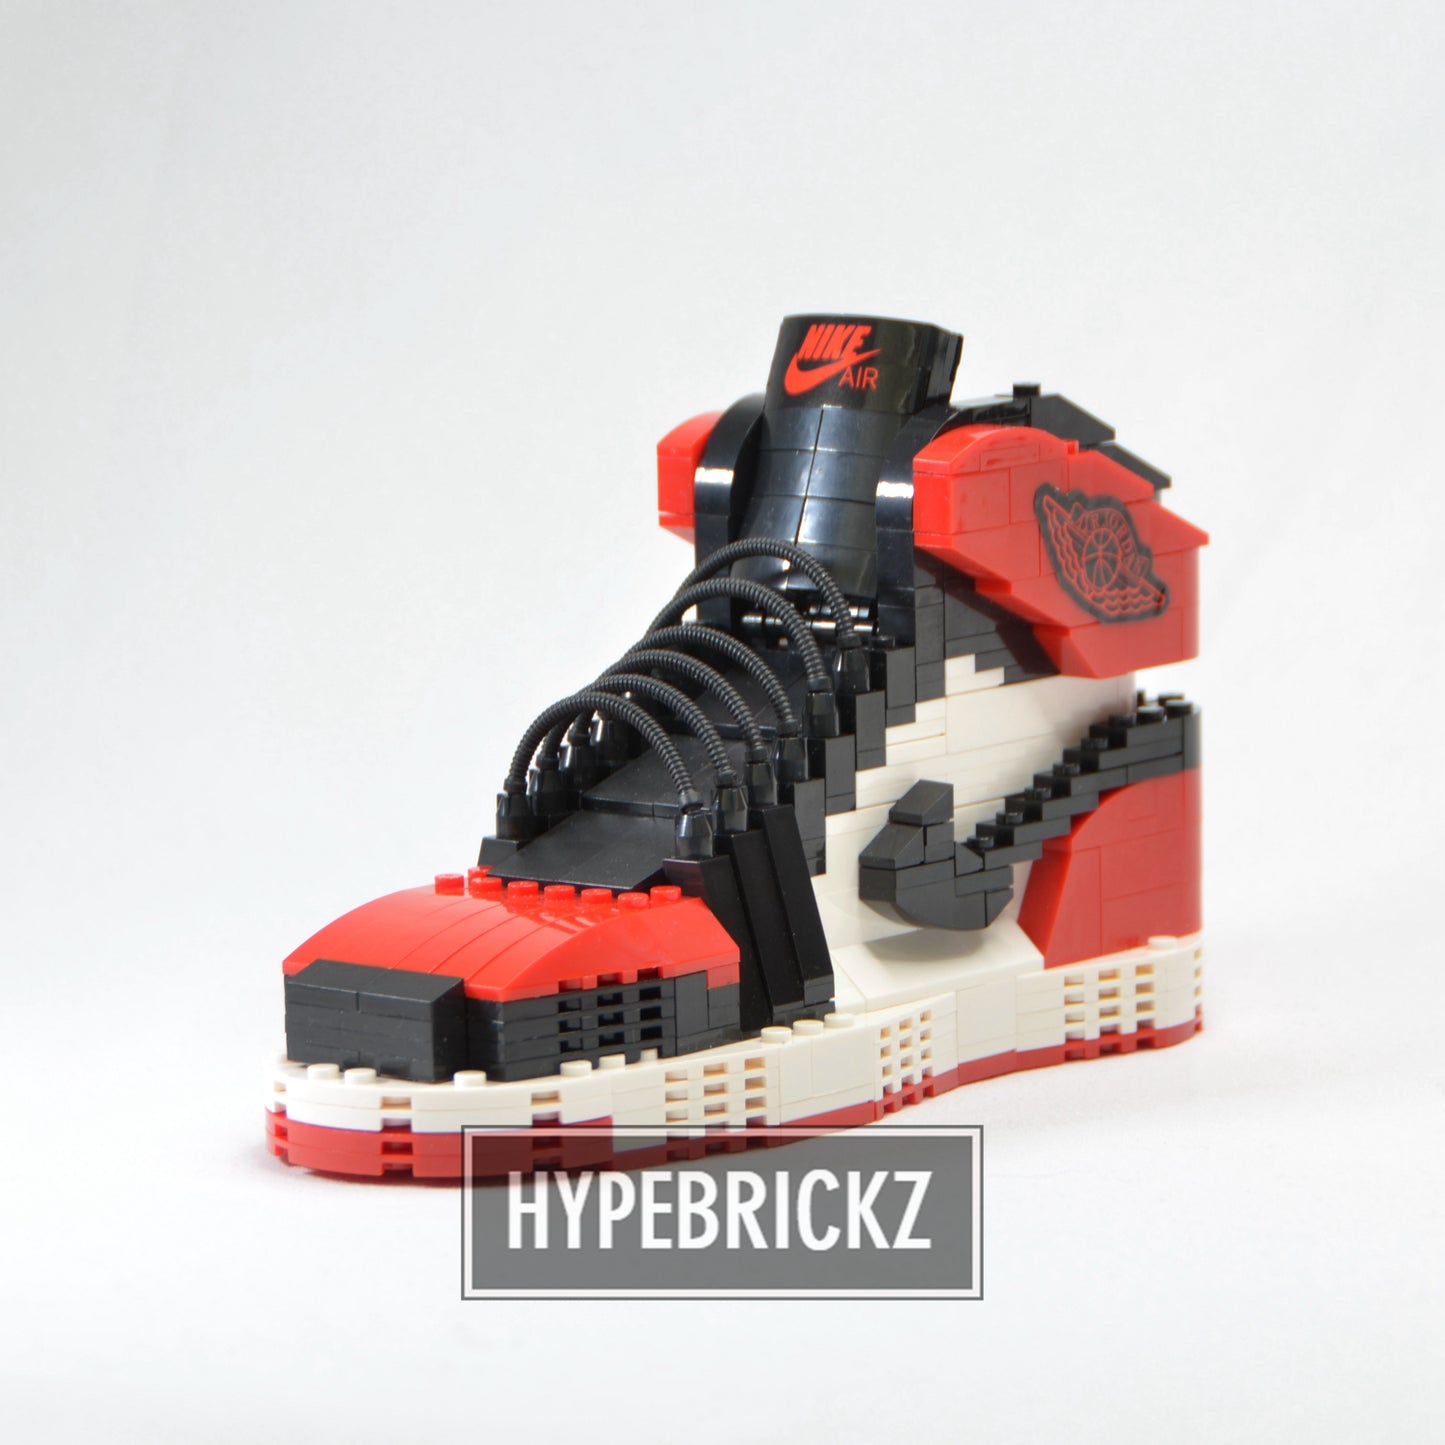 LARGE AJ1 "Bred Toe" Sneaker Bricks Sneaker 3D Puzzle Building Toy with Mini Figure